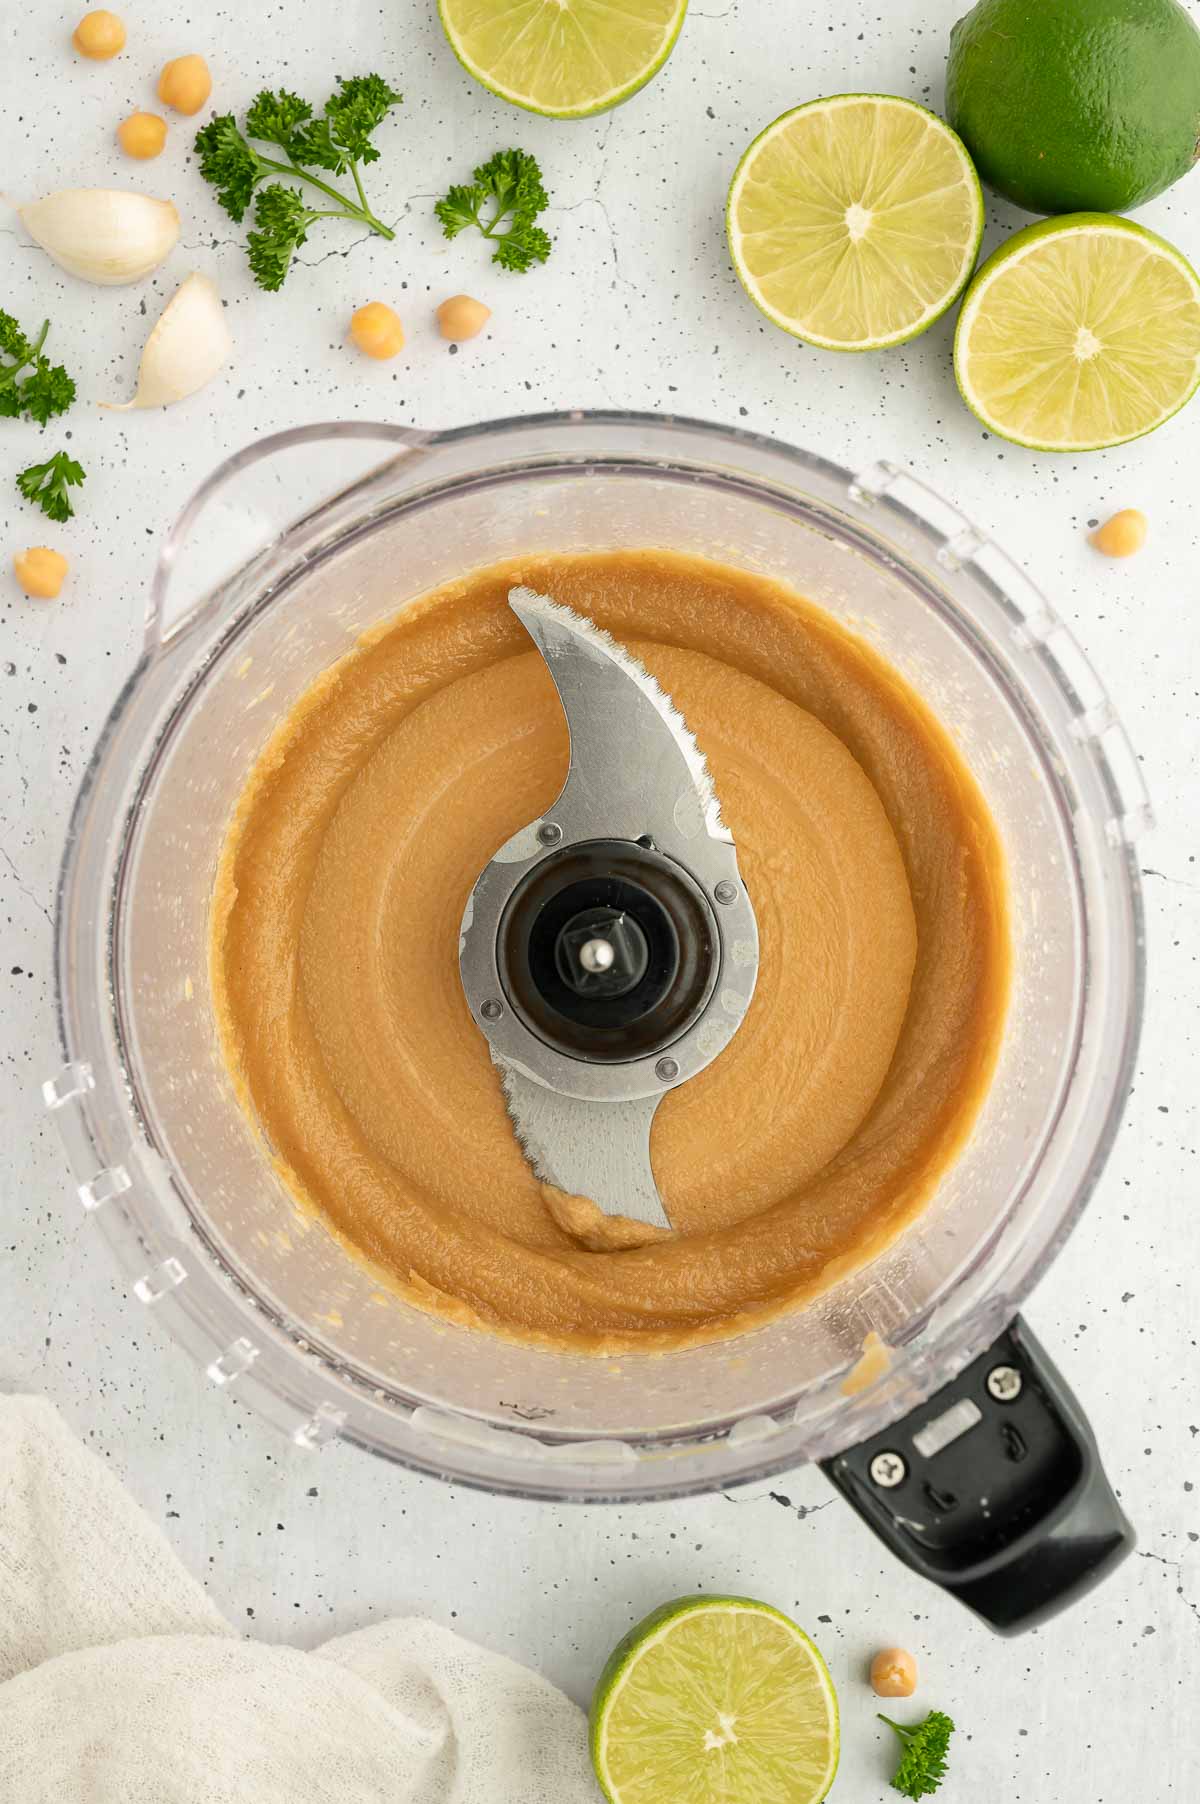 Hummus being prepped in a food processor.